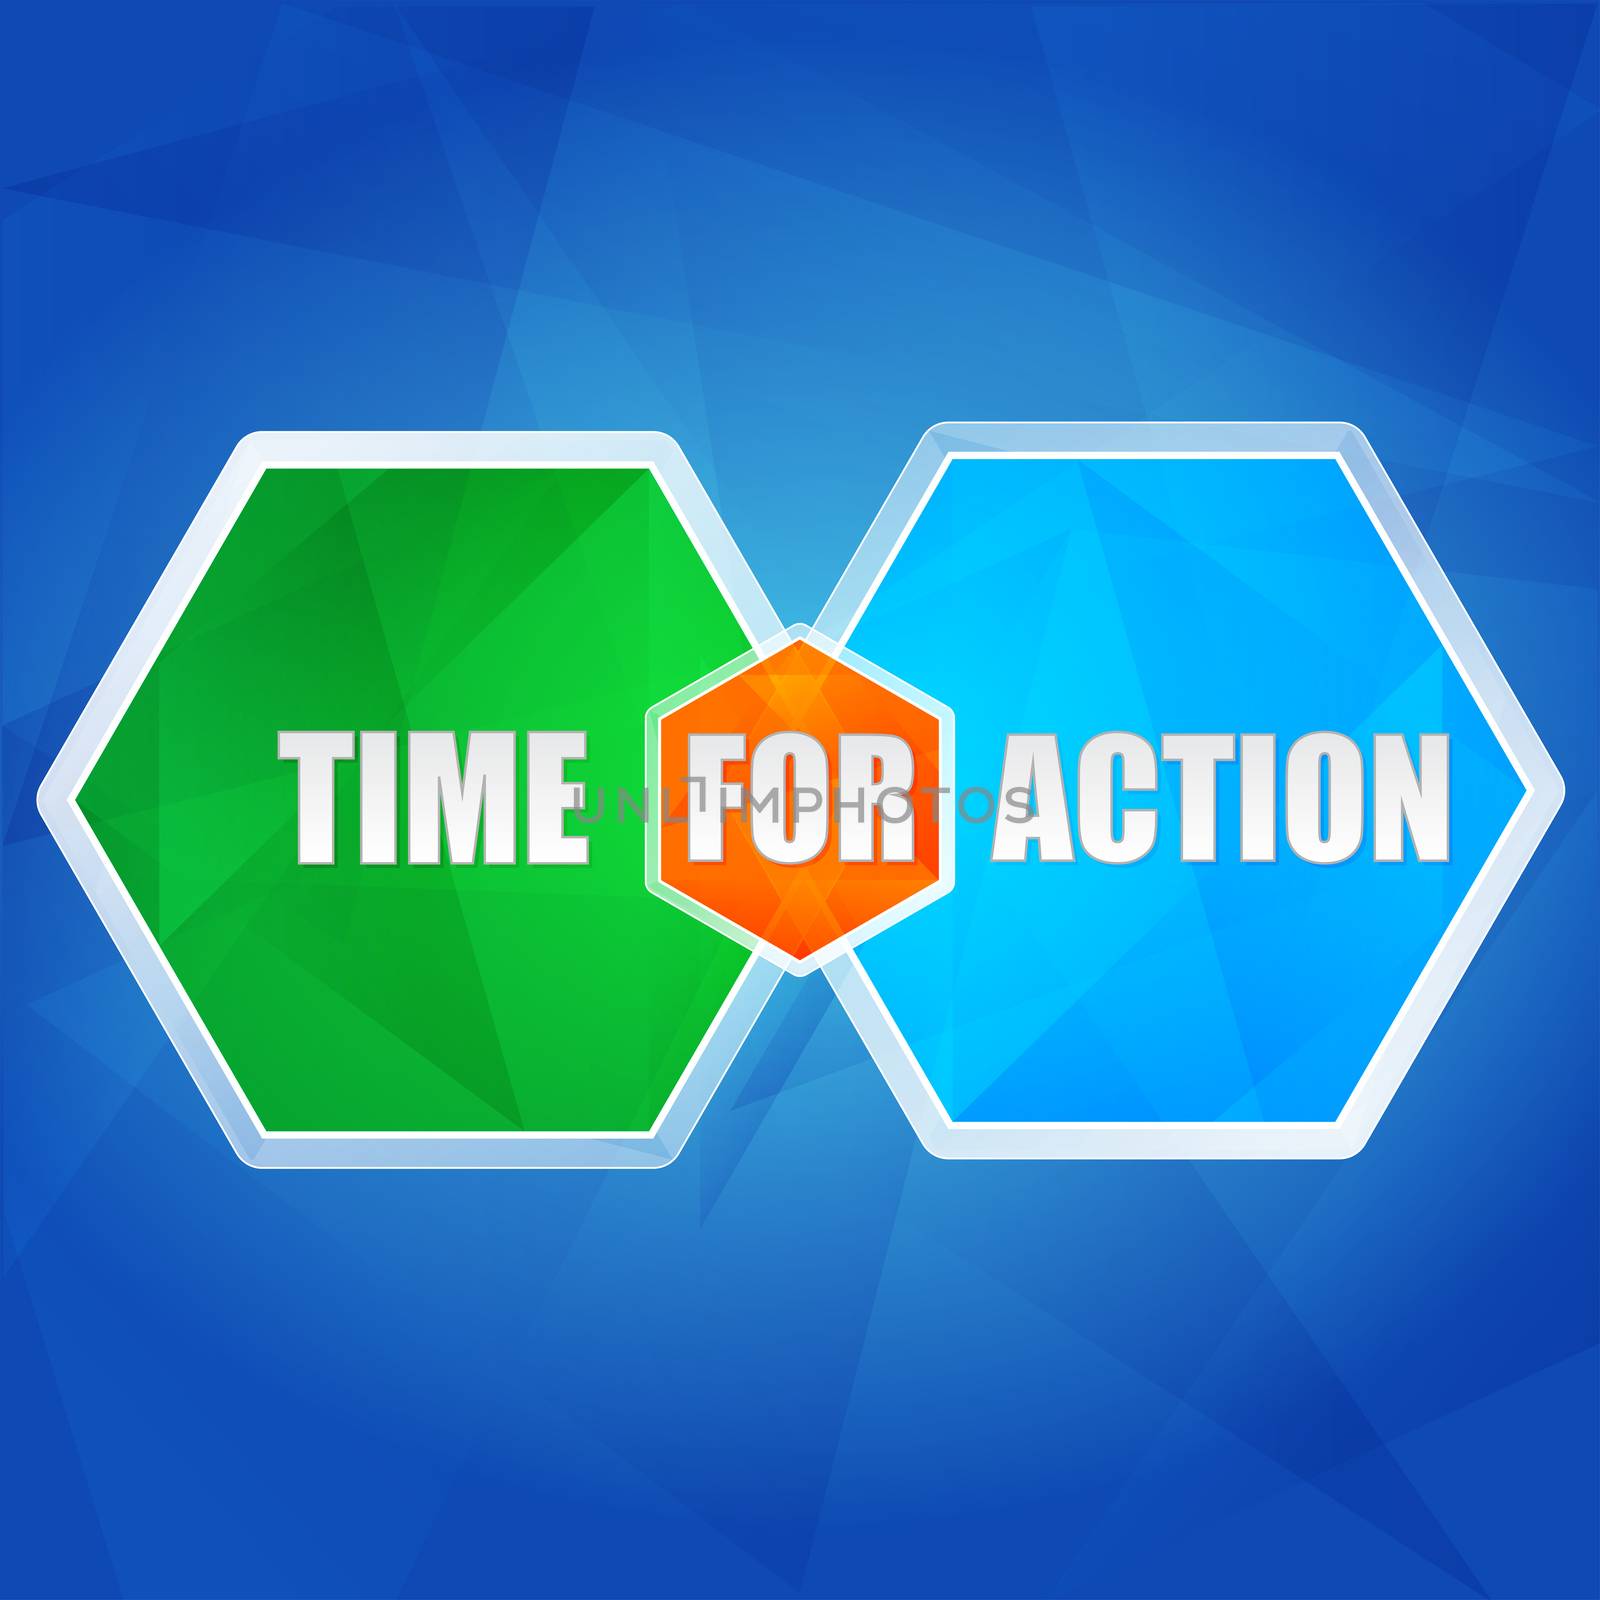 time for action in hexagons, flat design by marinini